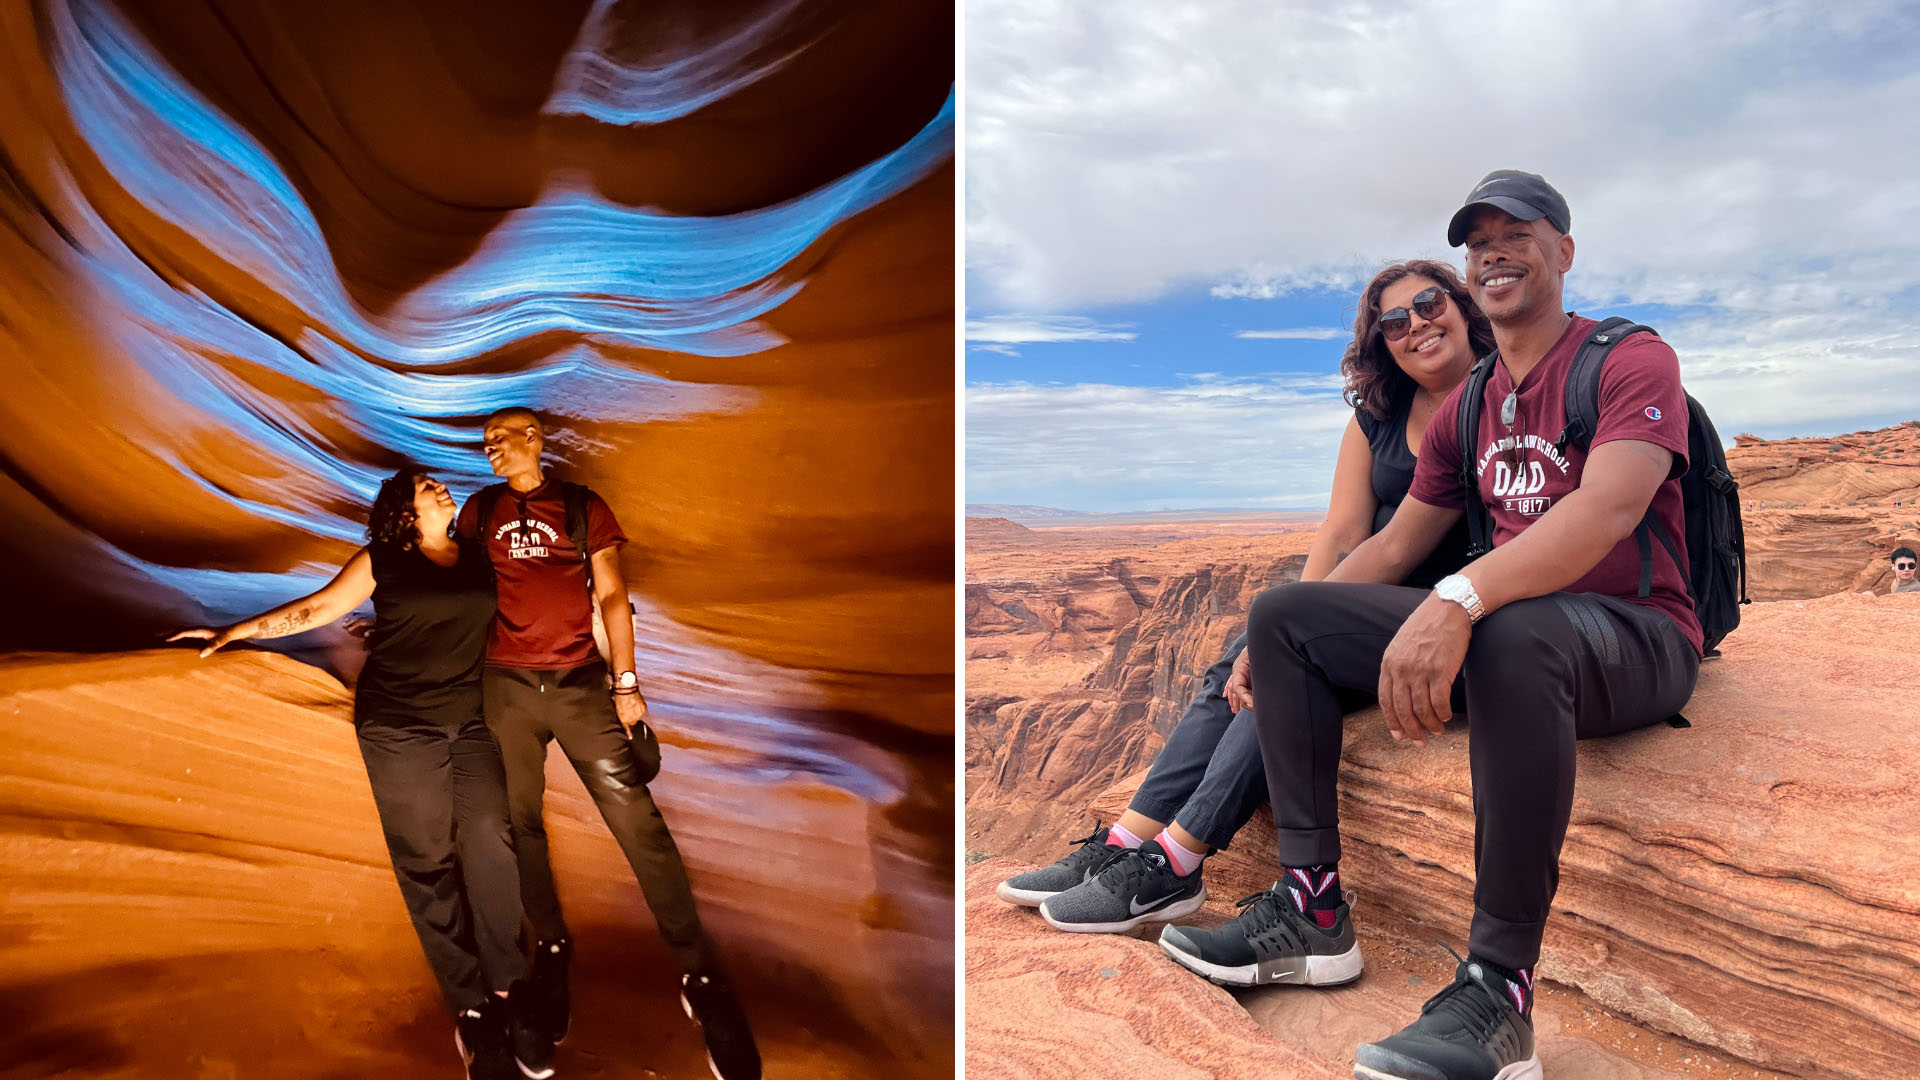 Side-by-side photos: 1) two people smiling at each other while standing in a cave and 2) the same two people sitting on a canyon side together.